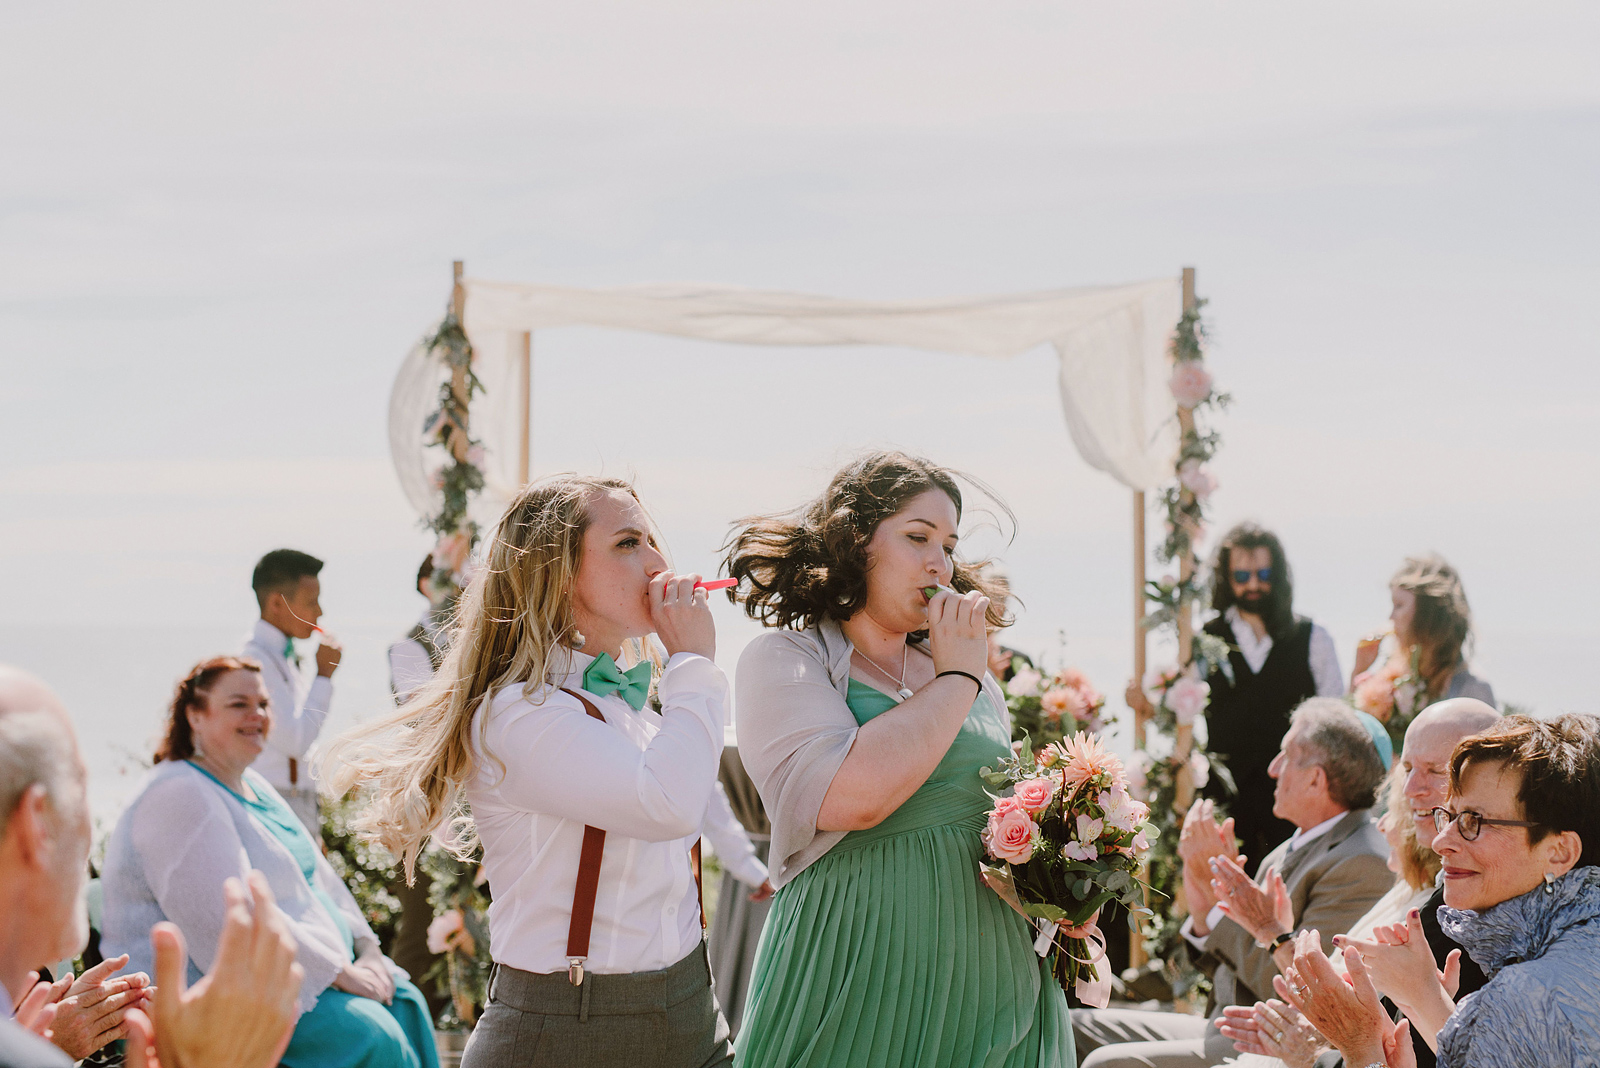 Wedding party playing kazoos during the ceremony recessional - Oceanside Community Club Wedding on the Oregon Coast” title=